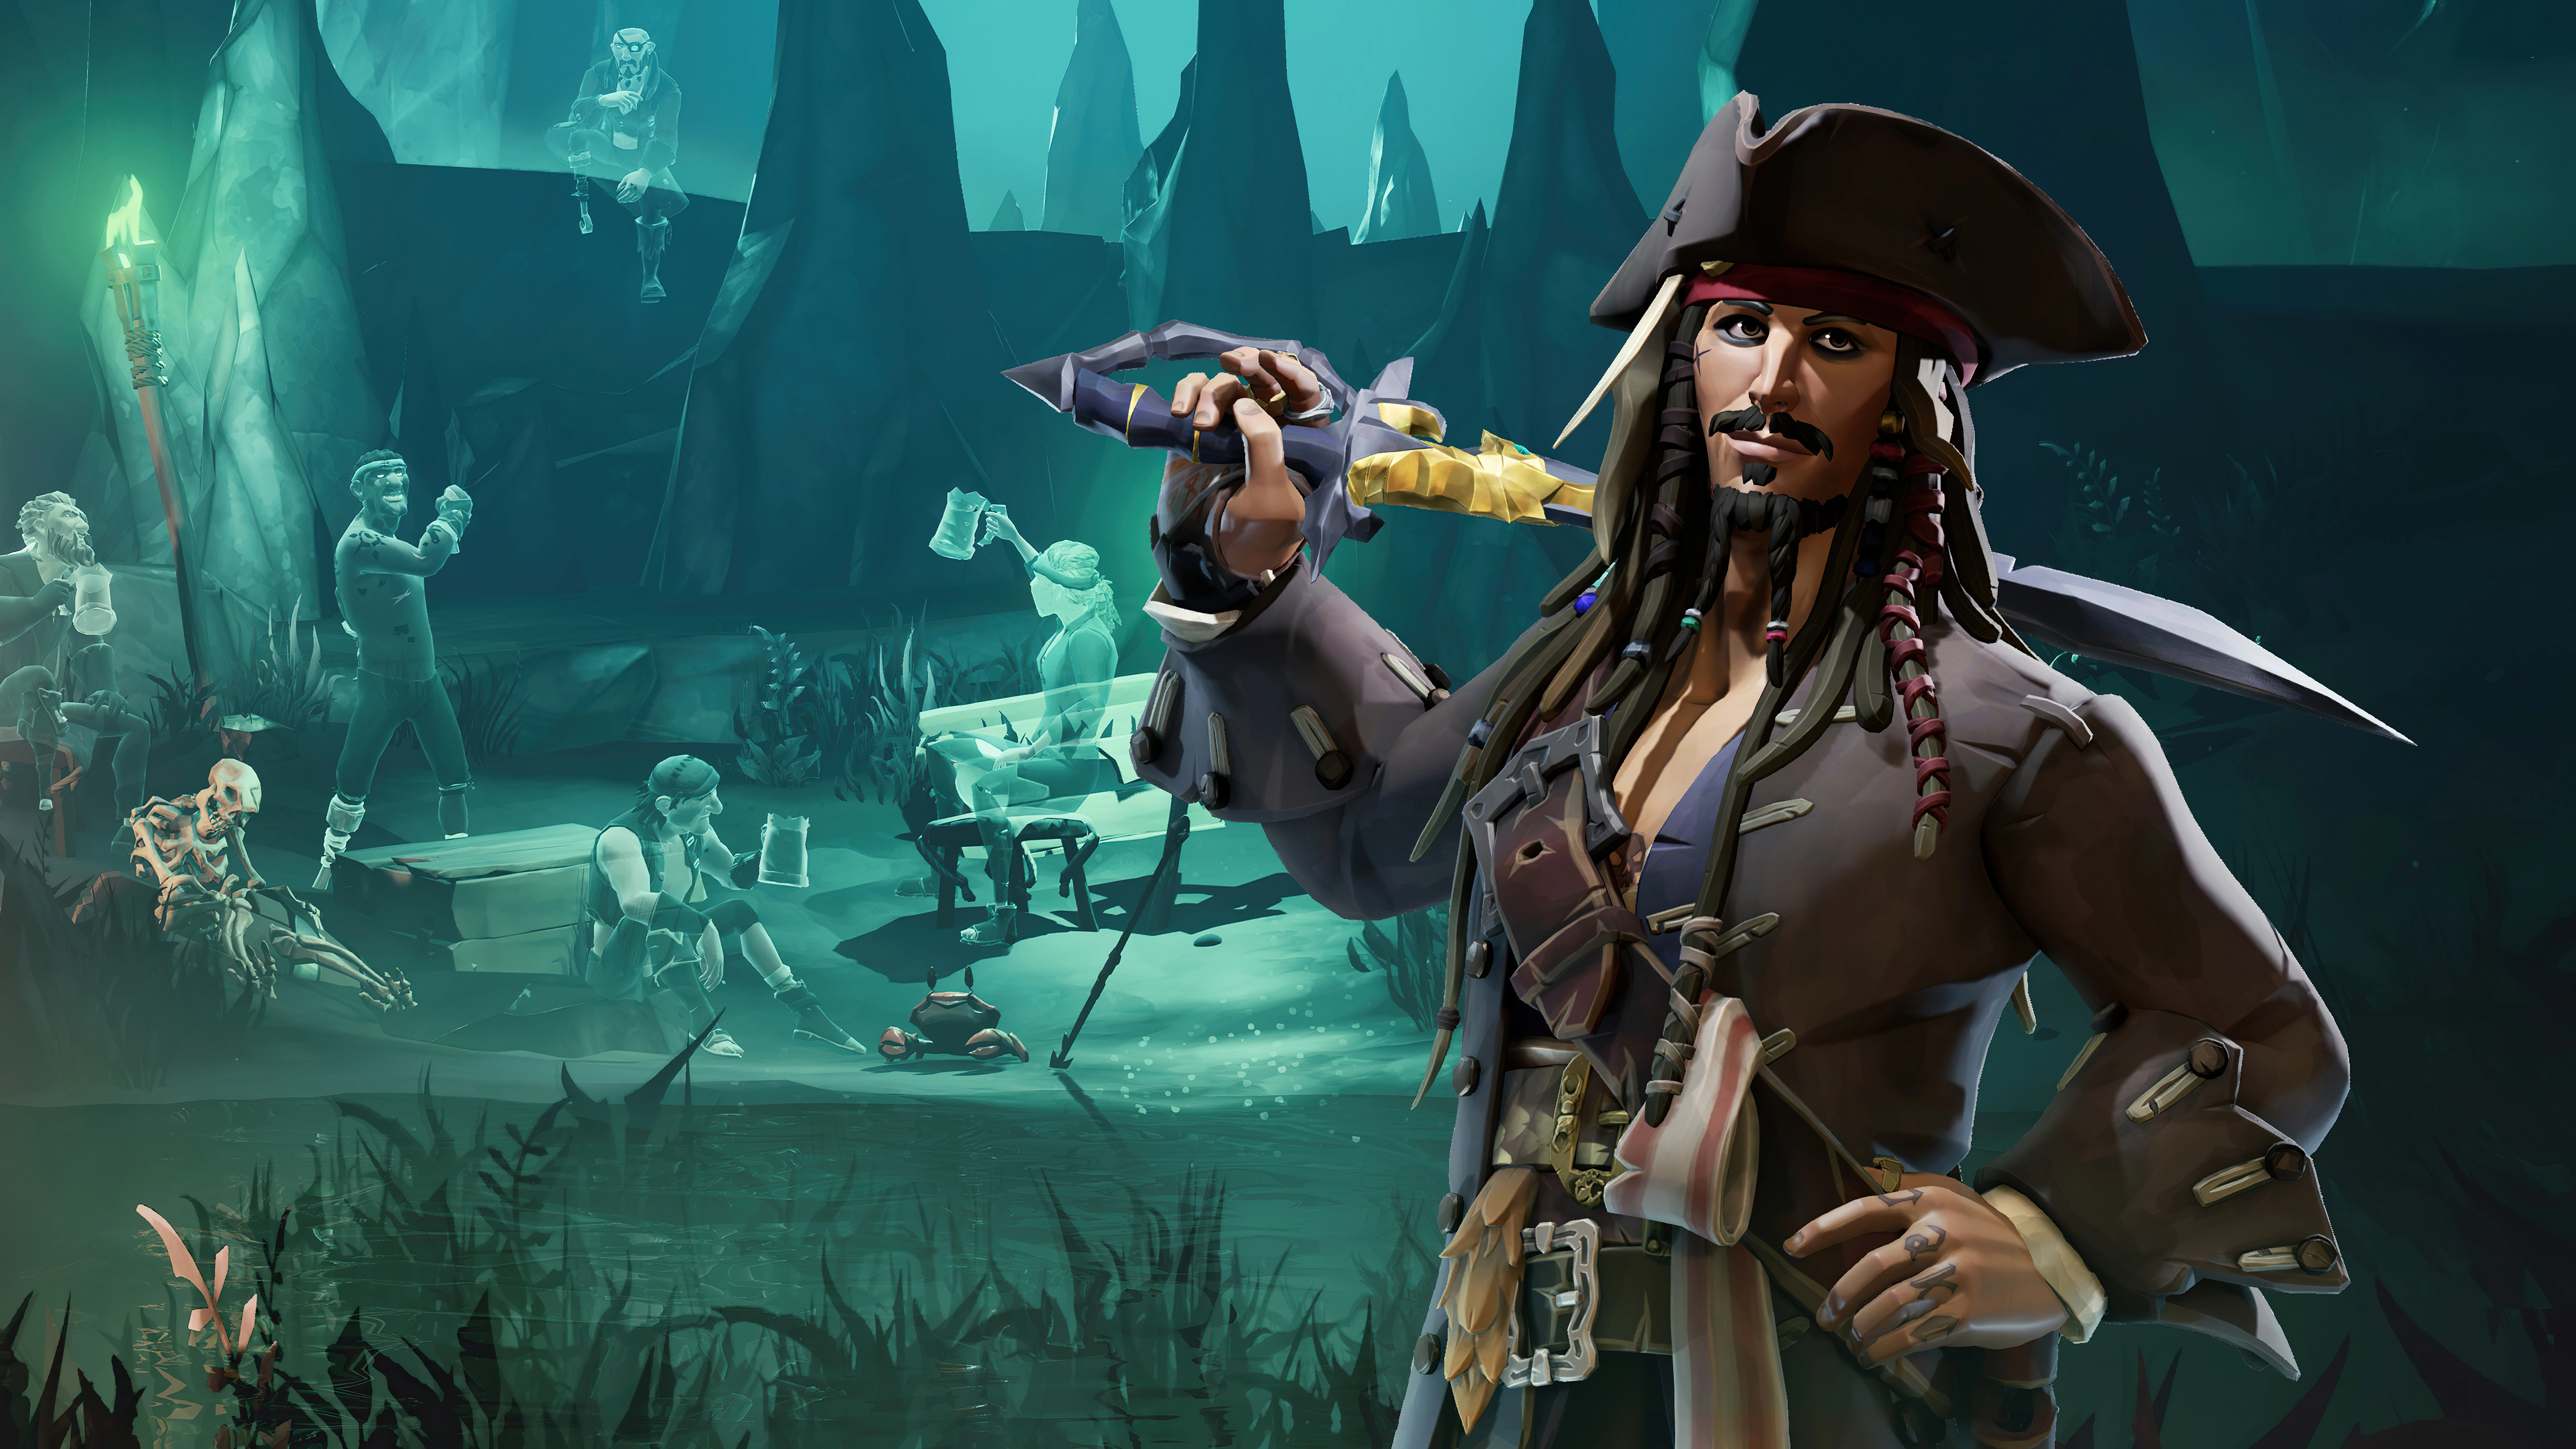 jack sparrow in sea of thieves e5.jpg